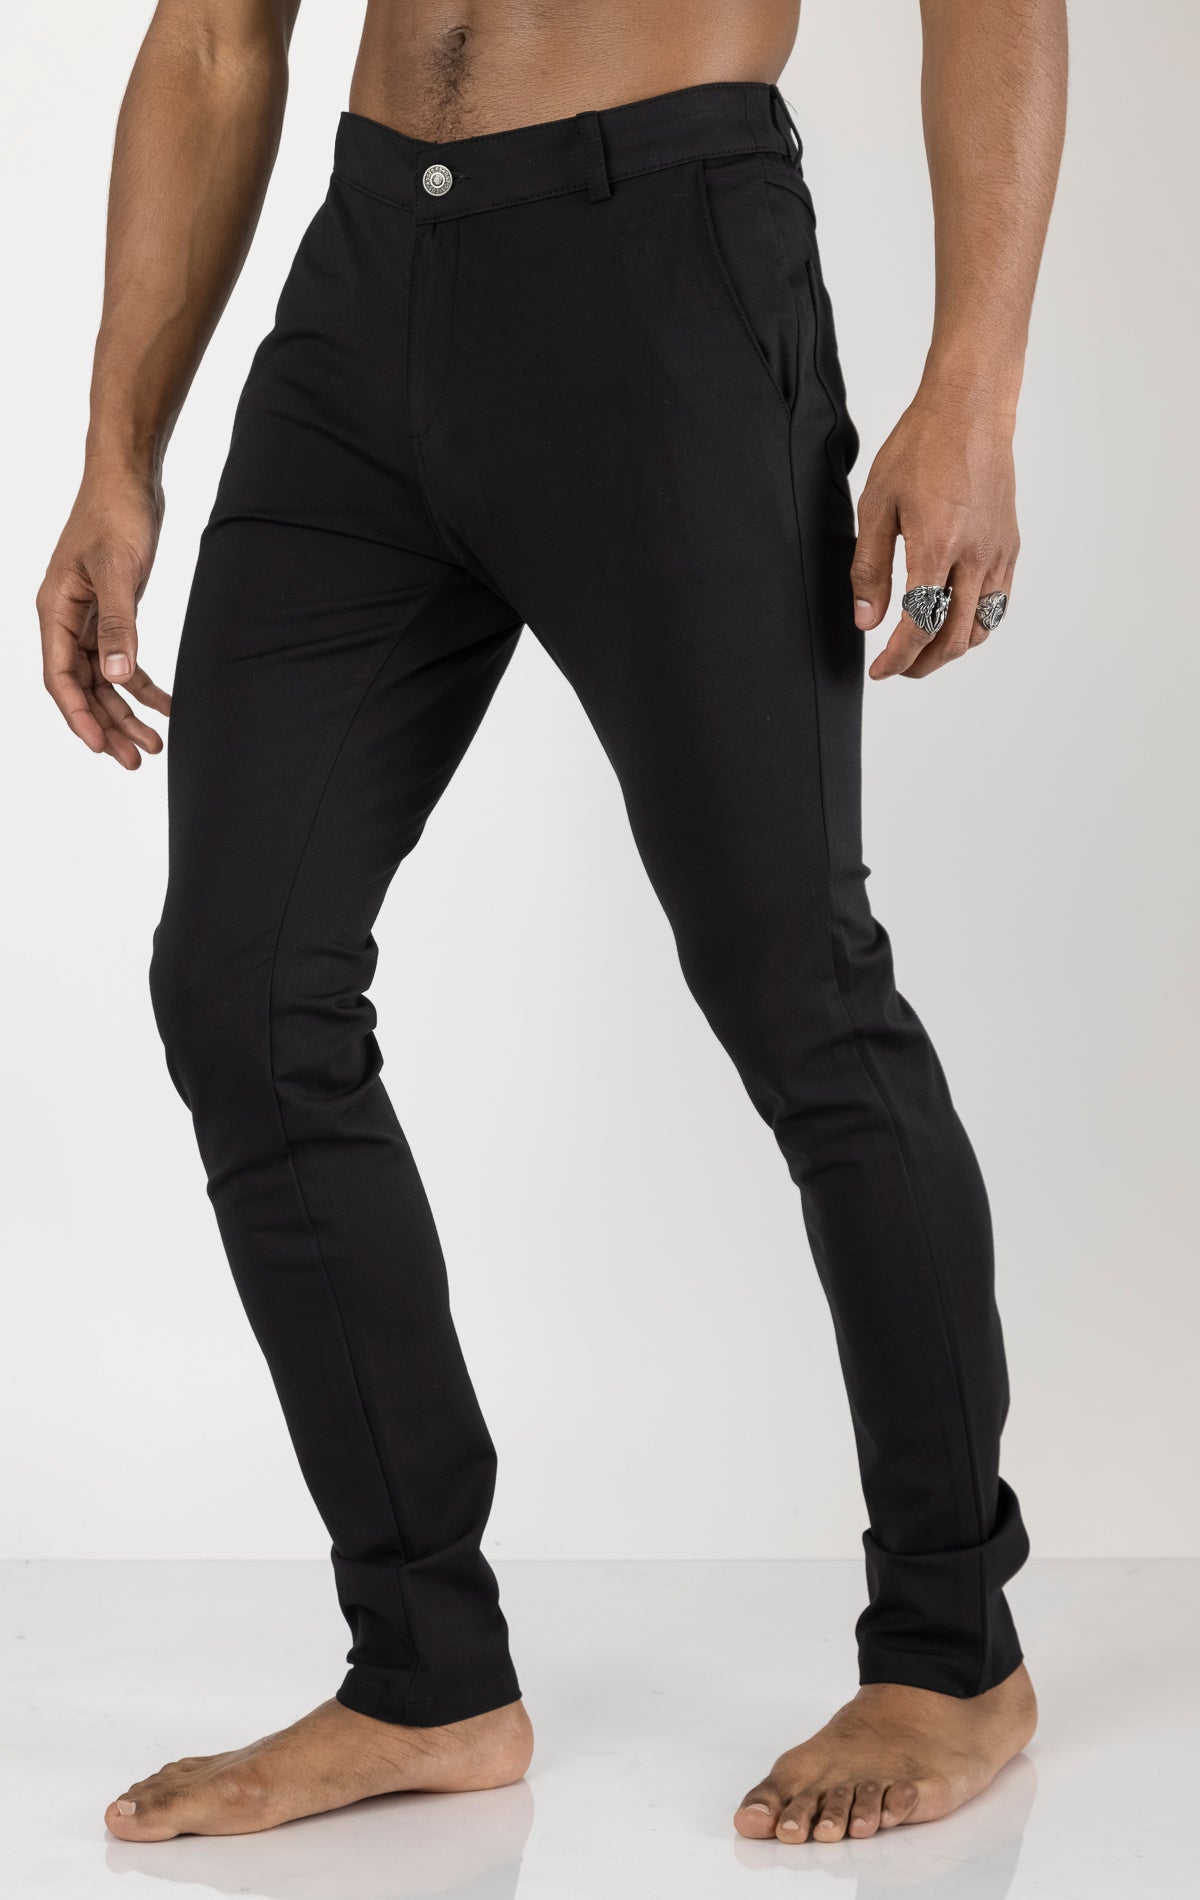 Men's casual wear pants in black. The pants are made from a blend of rayon (65%), nylon (27%), and elastane (8%) and feature a classic design with straight or tapered legs, belt loops, pockets, and a zip fly with button closure.